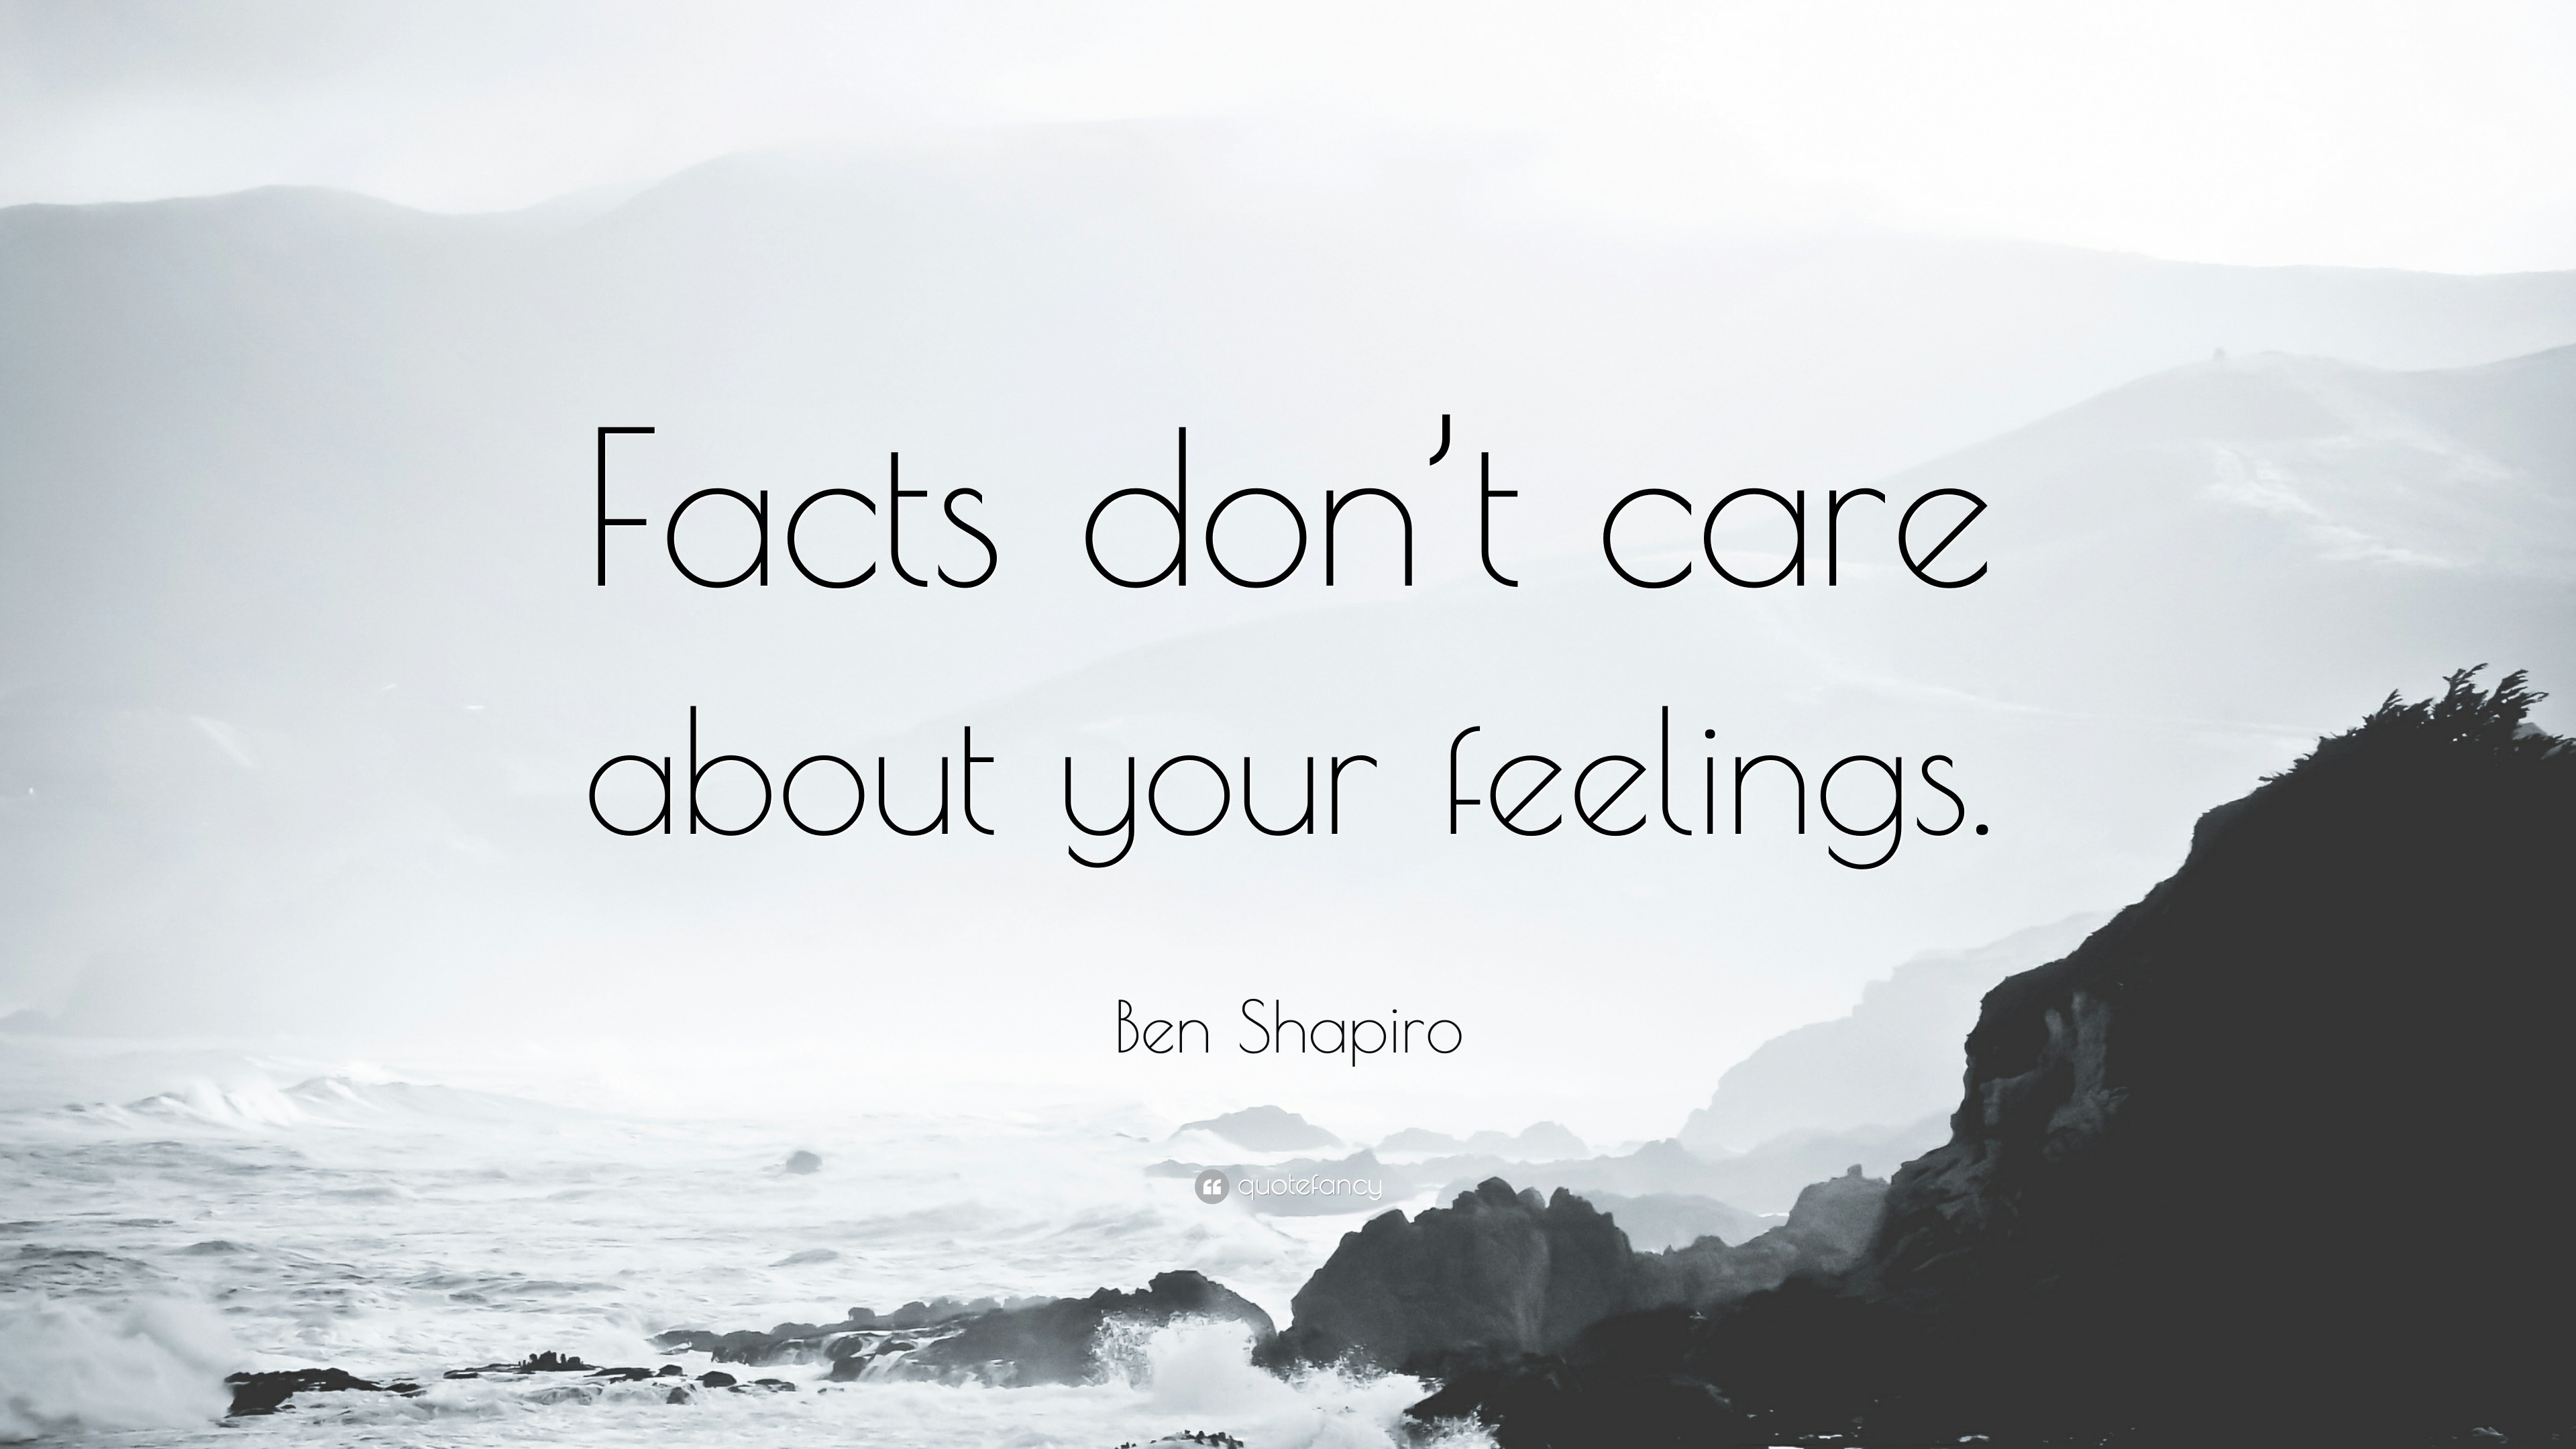 Ben Shapiro Quote: “Facts don't care about your feelings.”